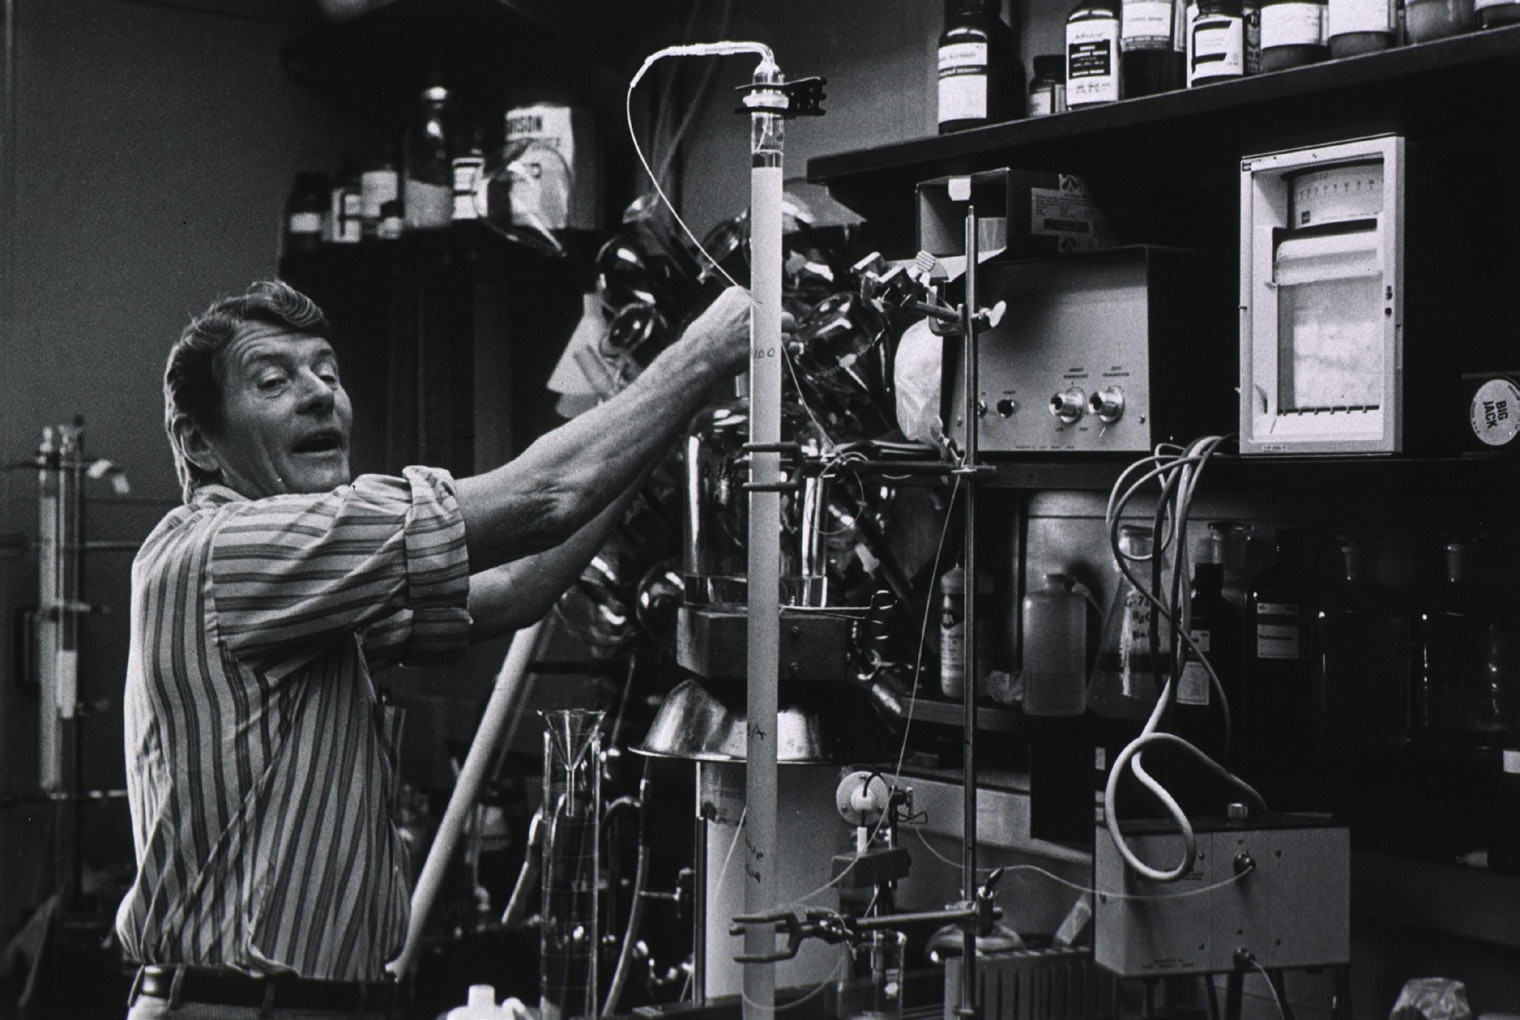 Dr. Christian Anfinsen working in a lab.